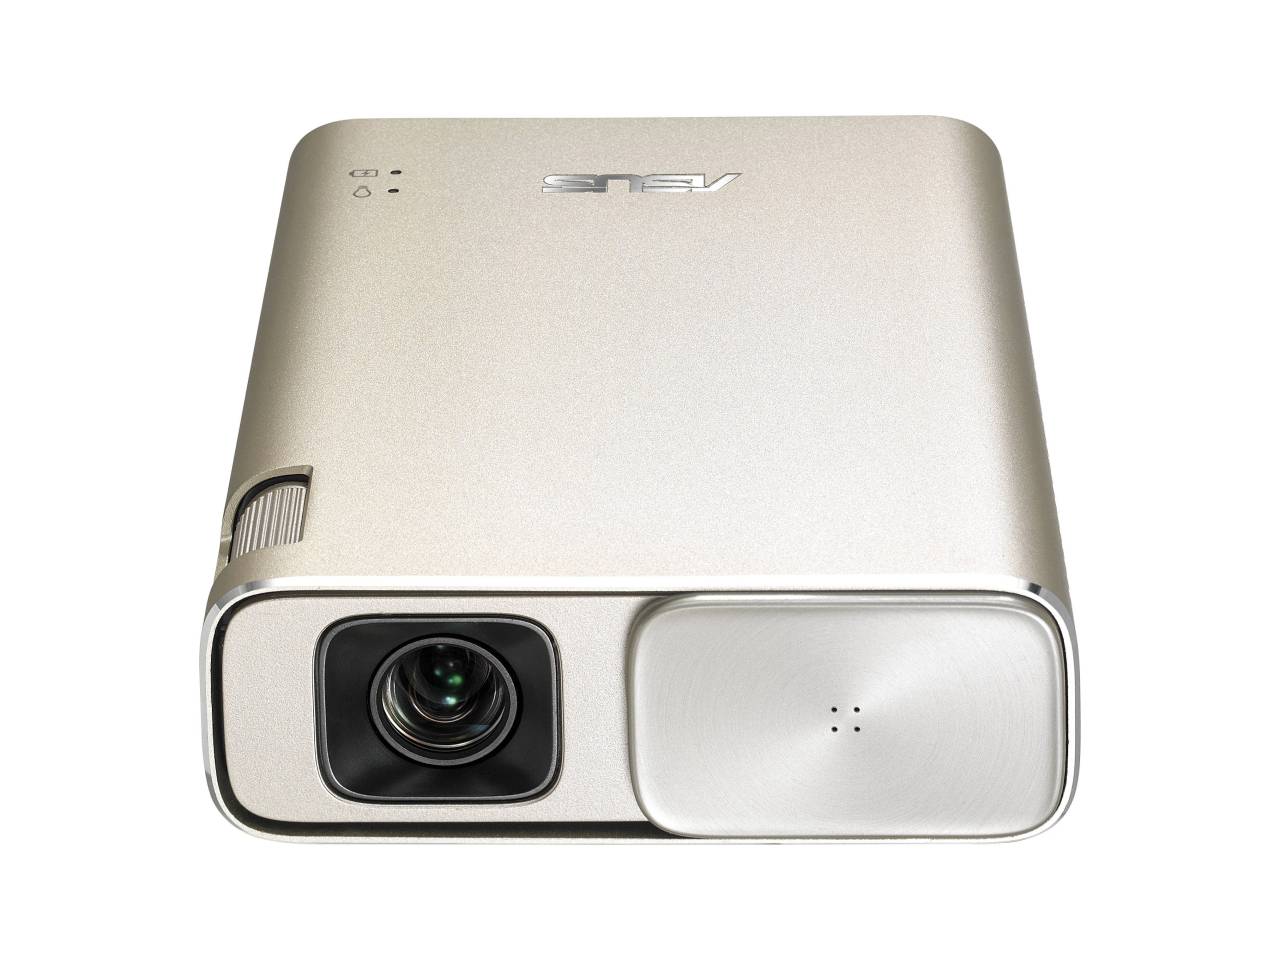 ASUS ZenBeam Go E1Z USB Pocket Projector, 150 Lumens, Built-in 6400mAh Battery, Up to 5-hour Projection time, Power Bank, Auto Keystone Correction, Micro USB / Type-C